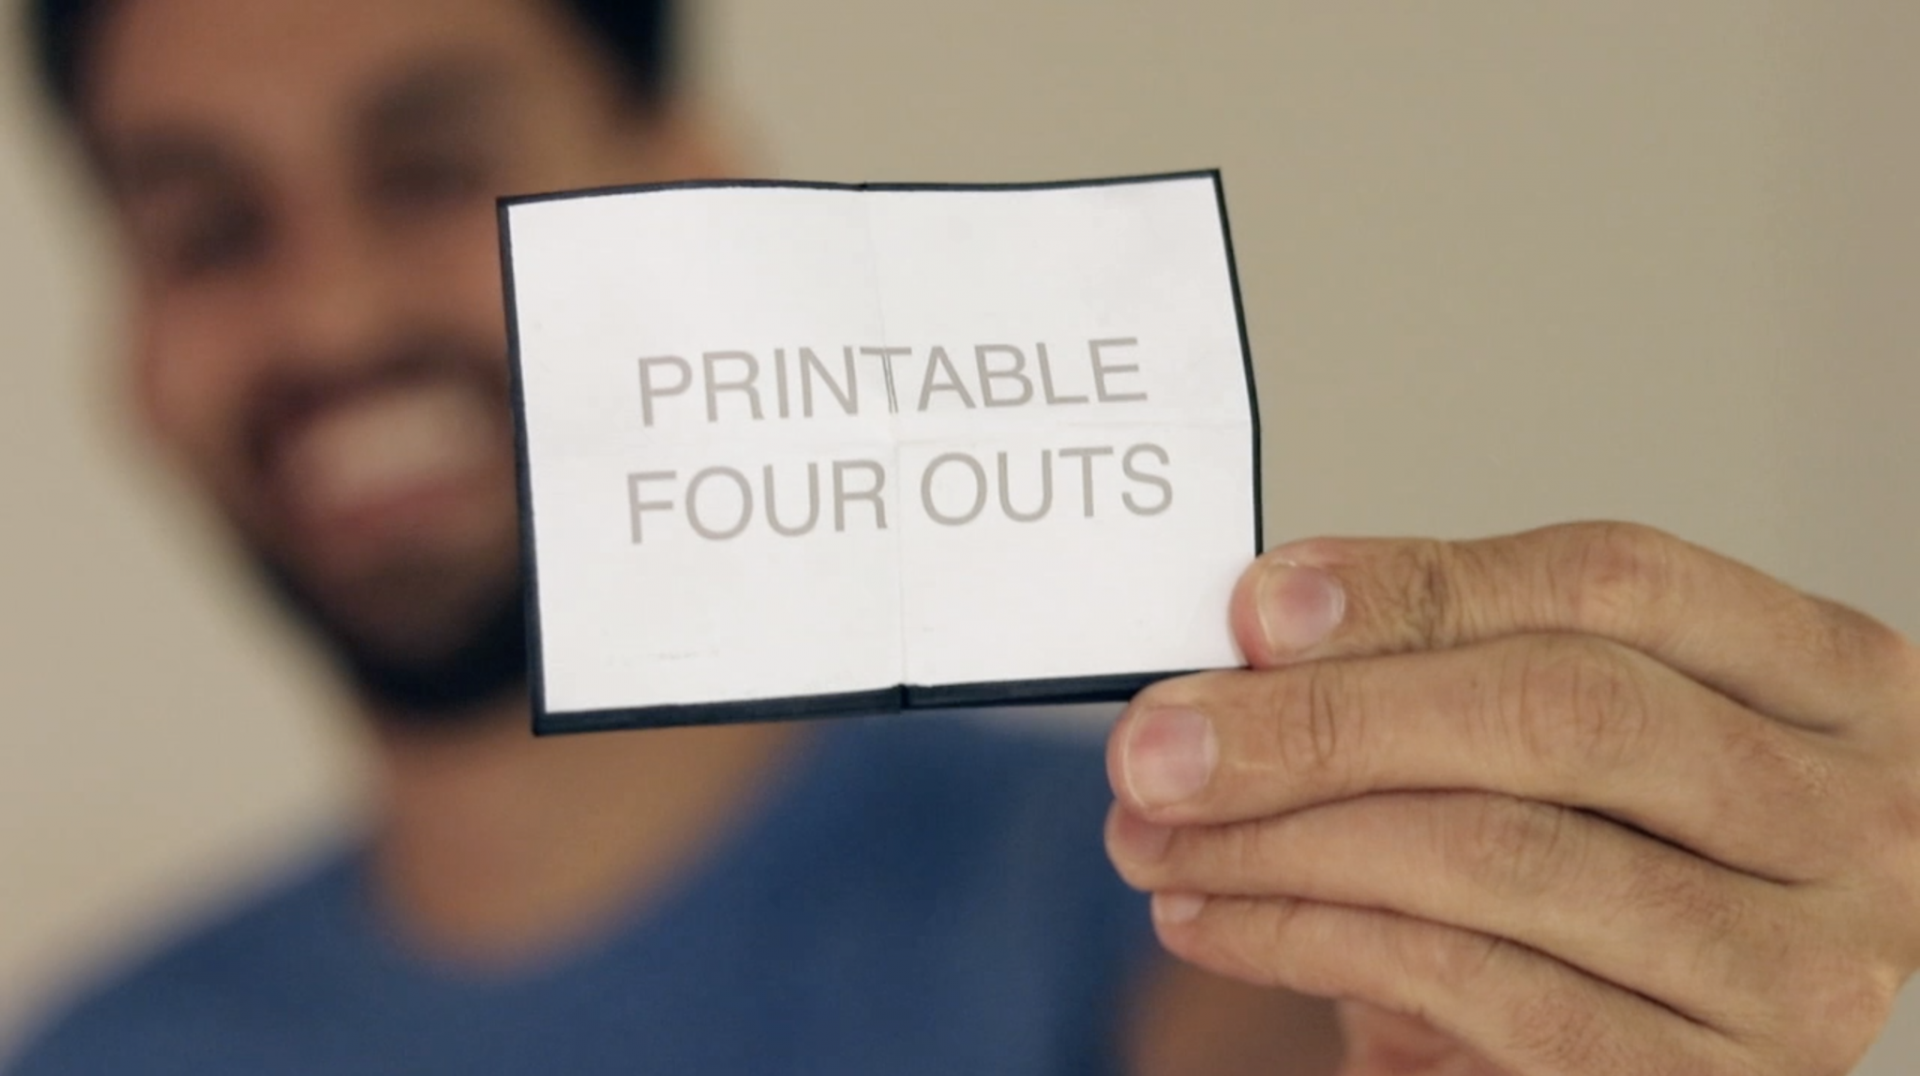 Printable Four Outs by Blake Vogt (Full Download)